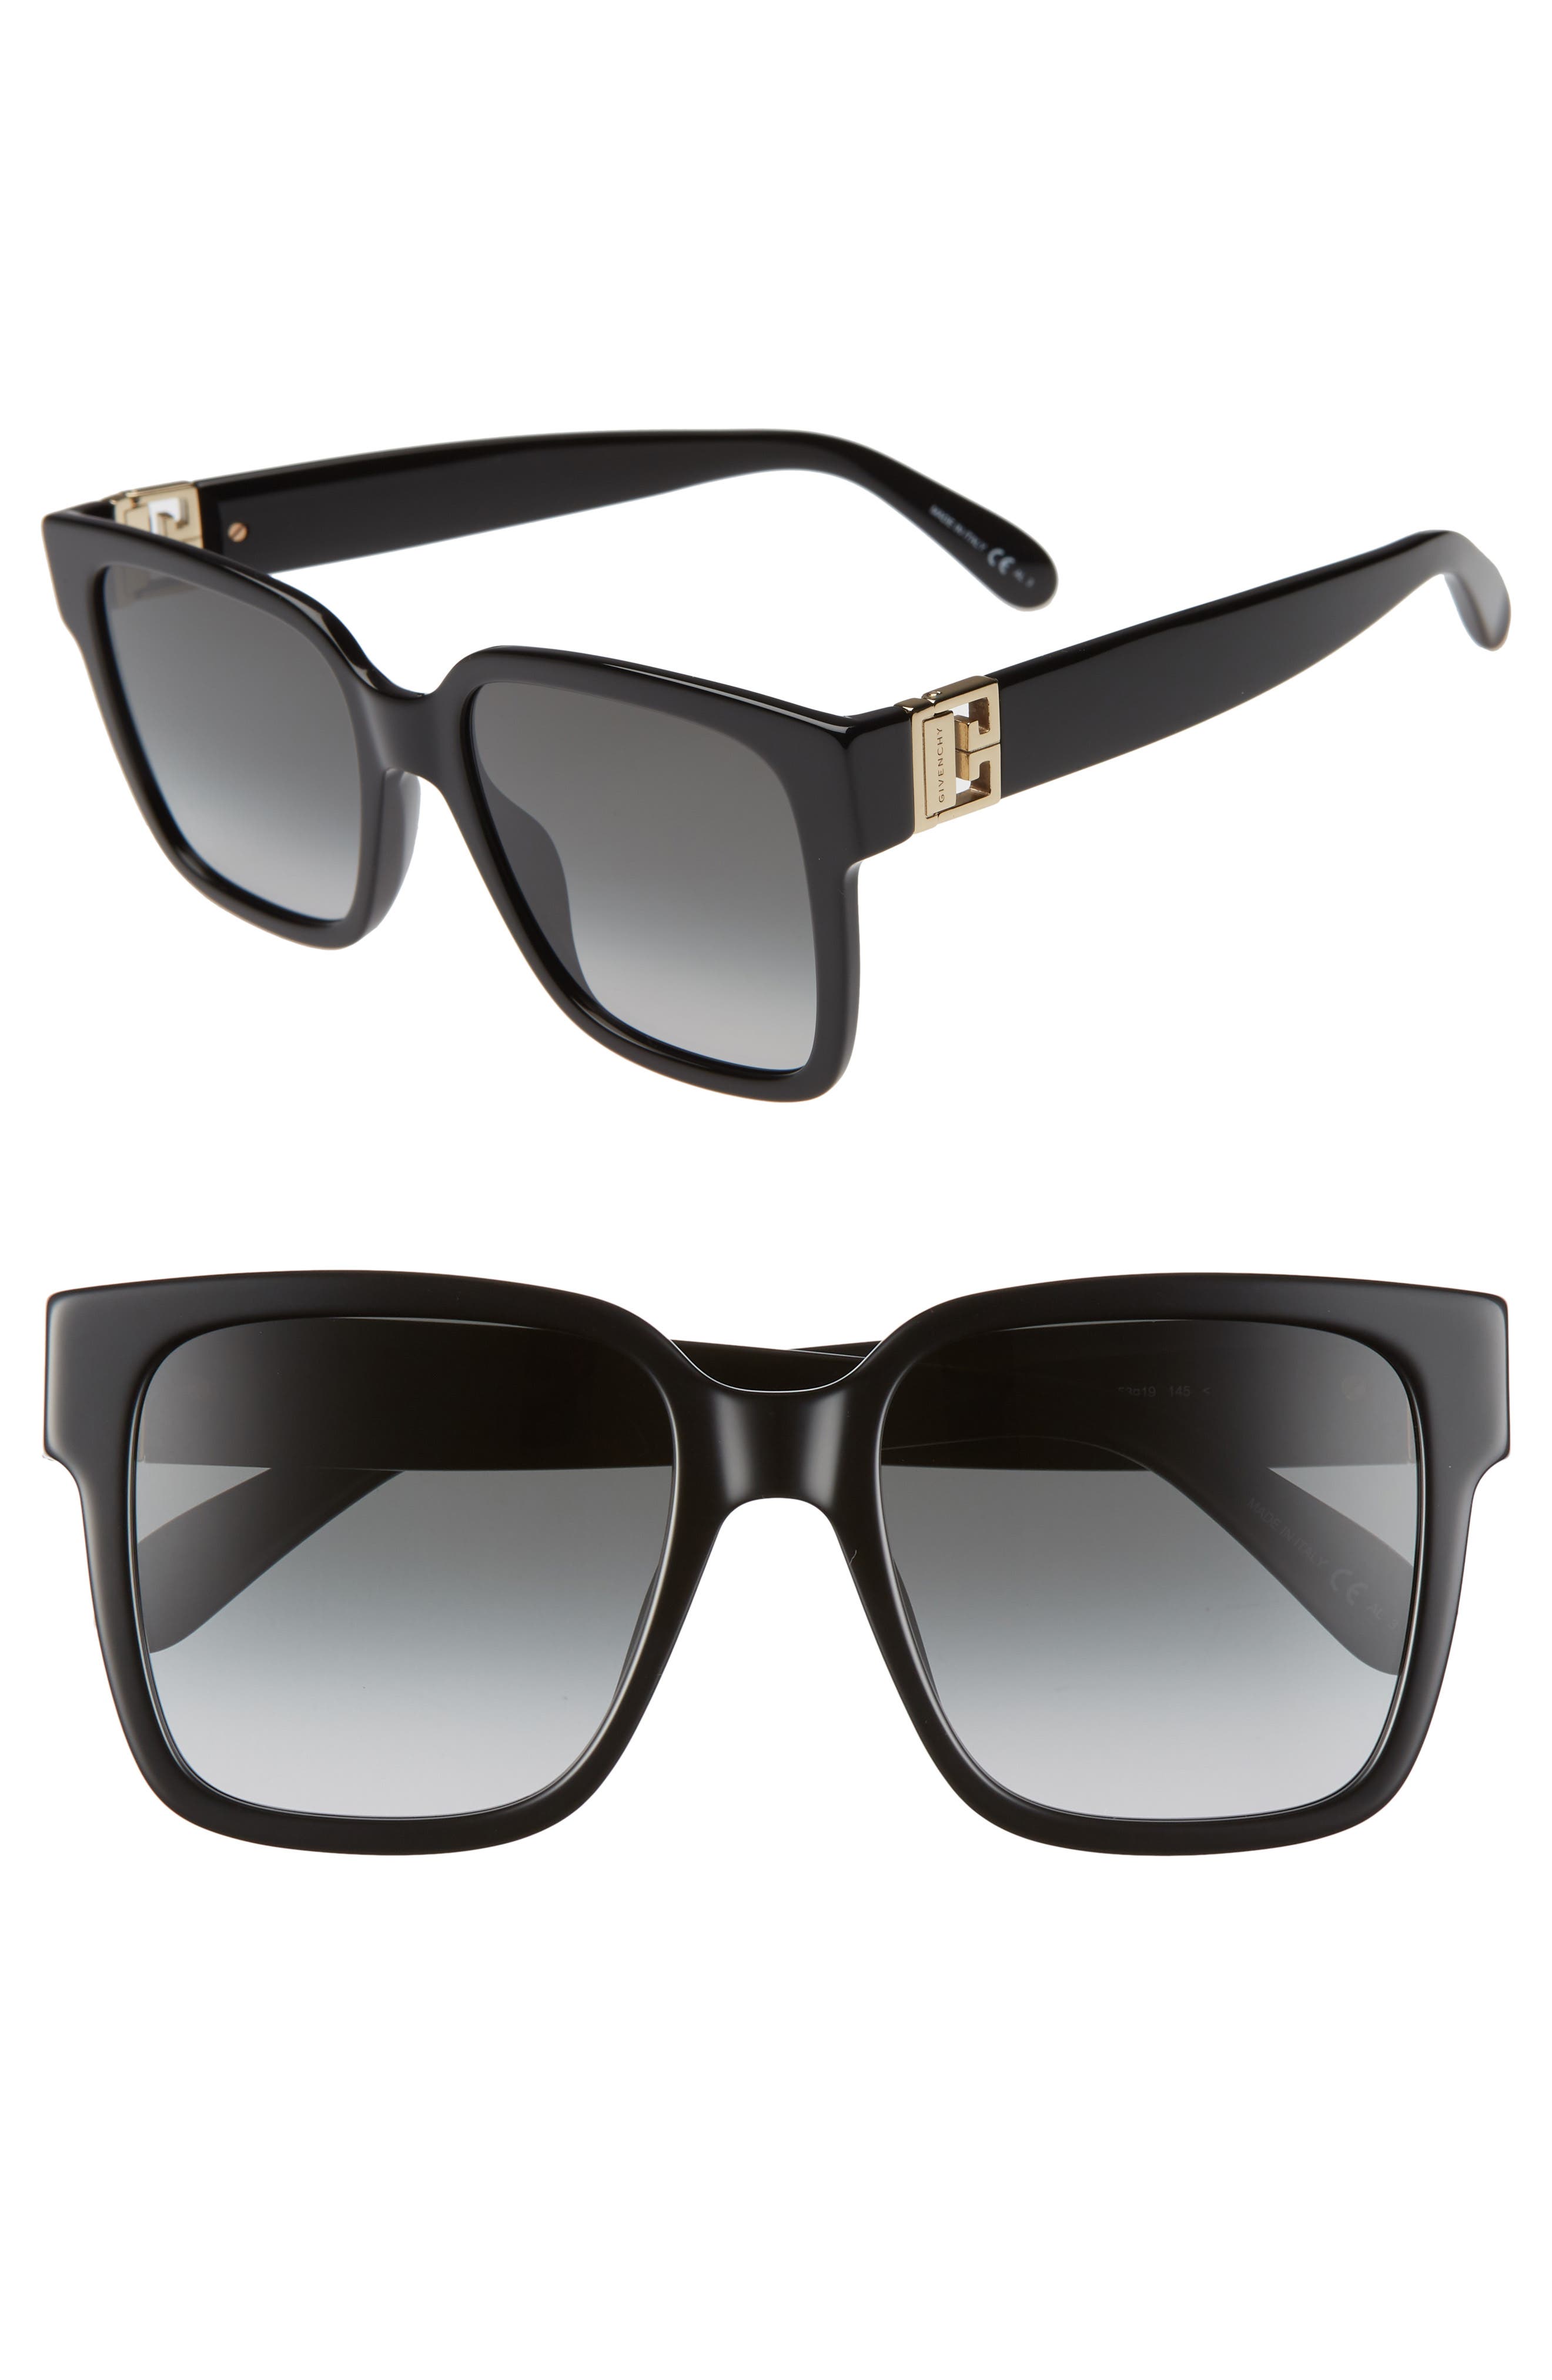 Givenchy Sunglasses for Women | Nordstrom